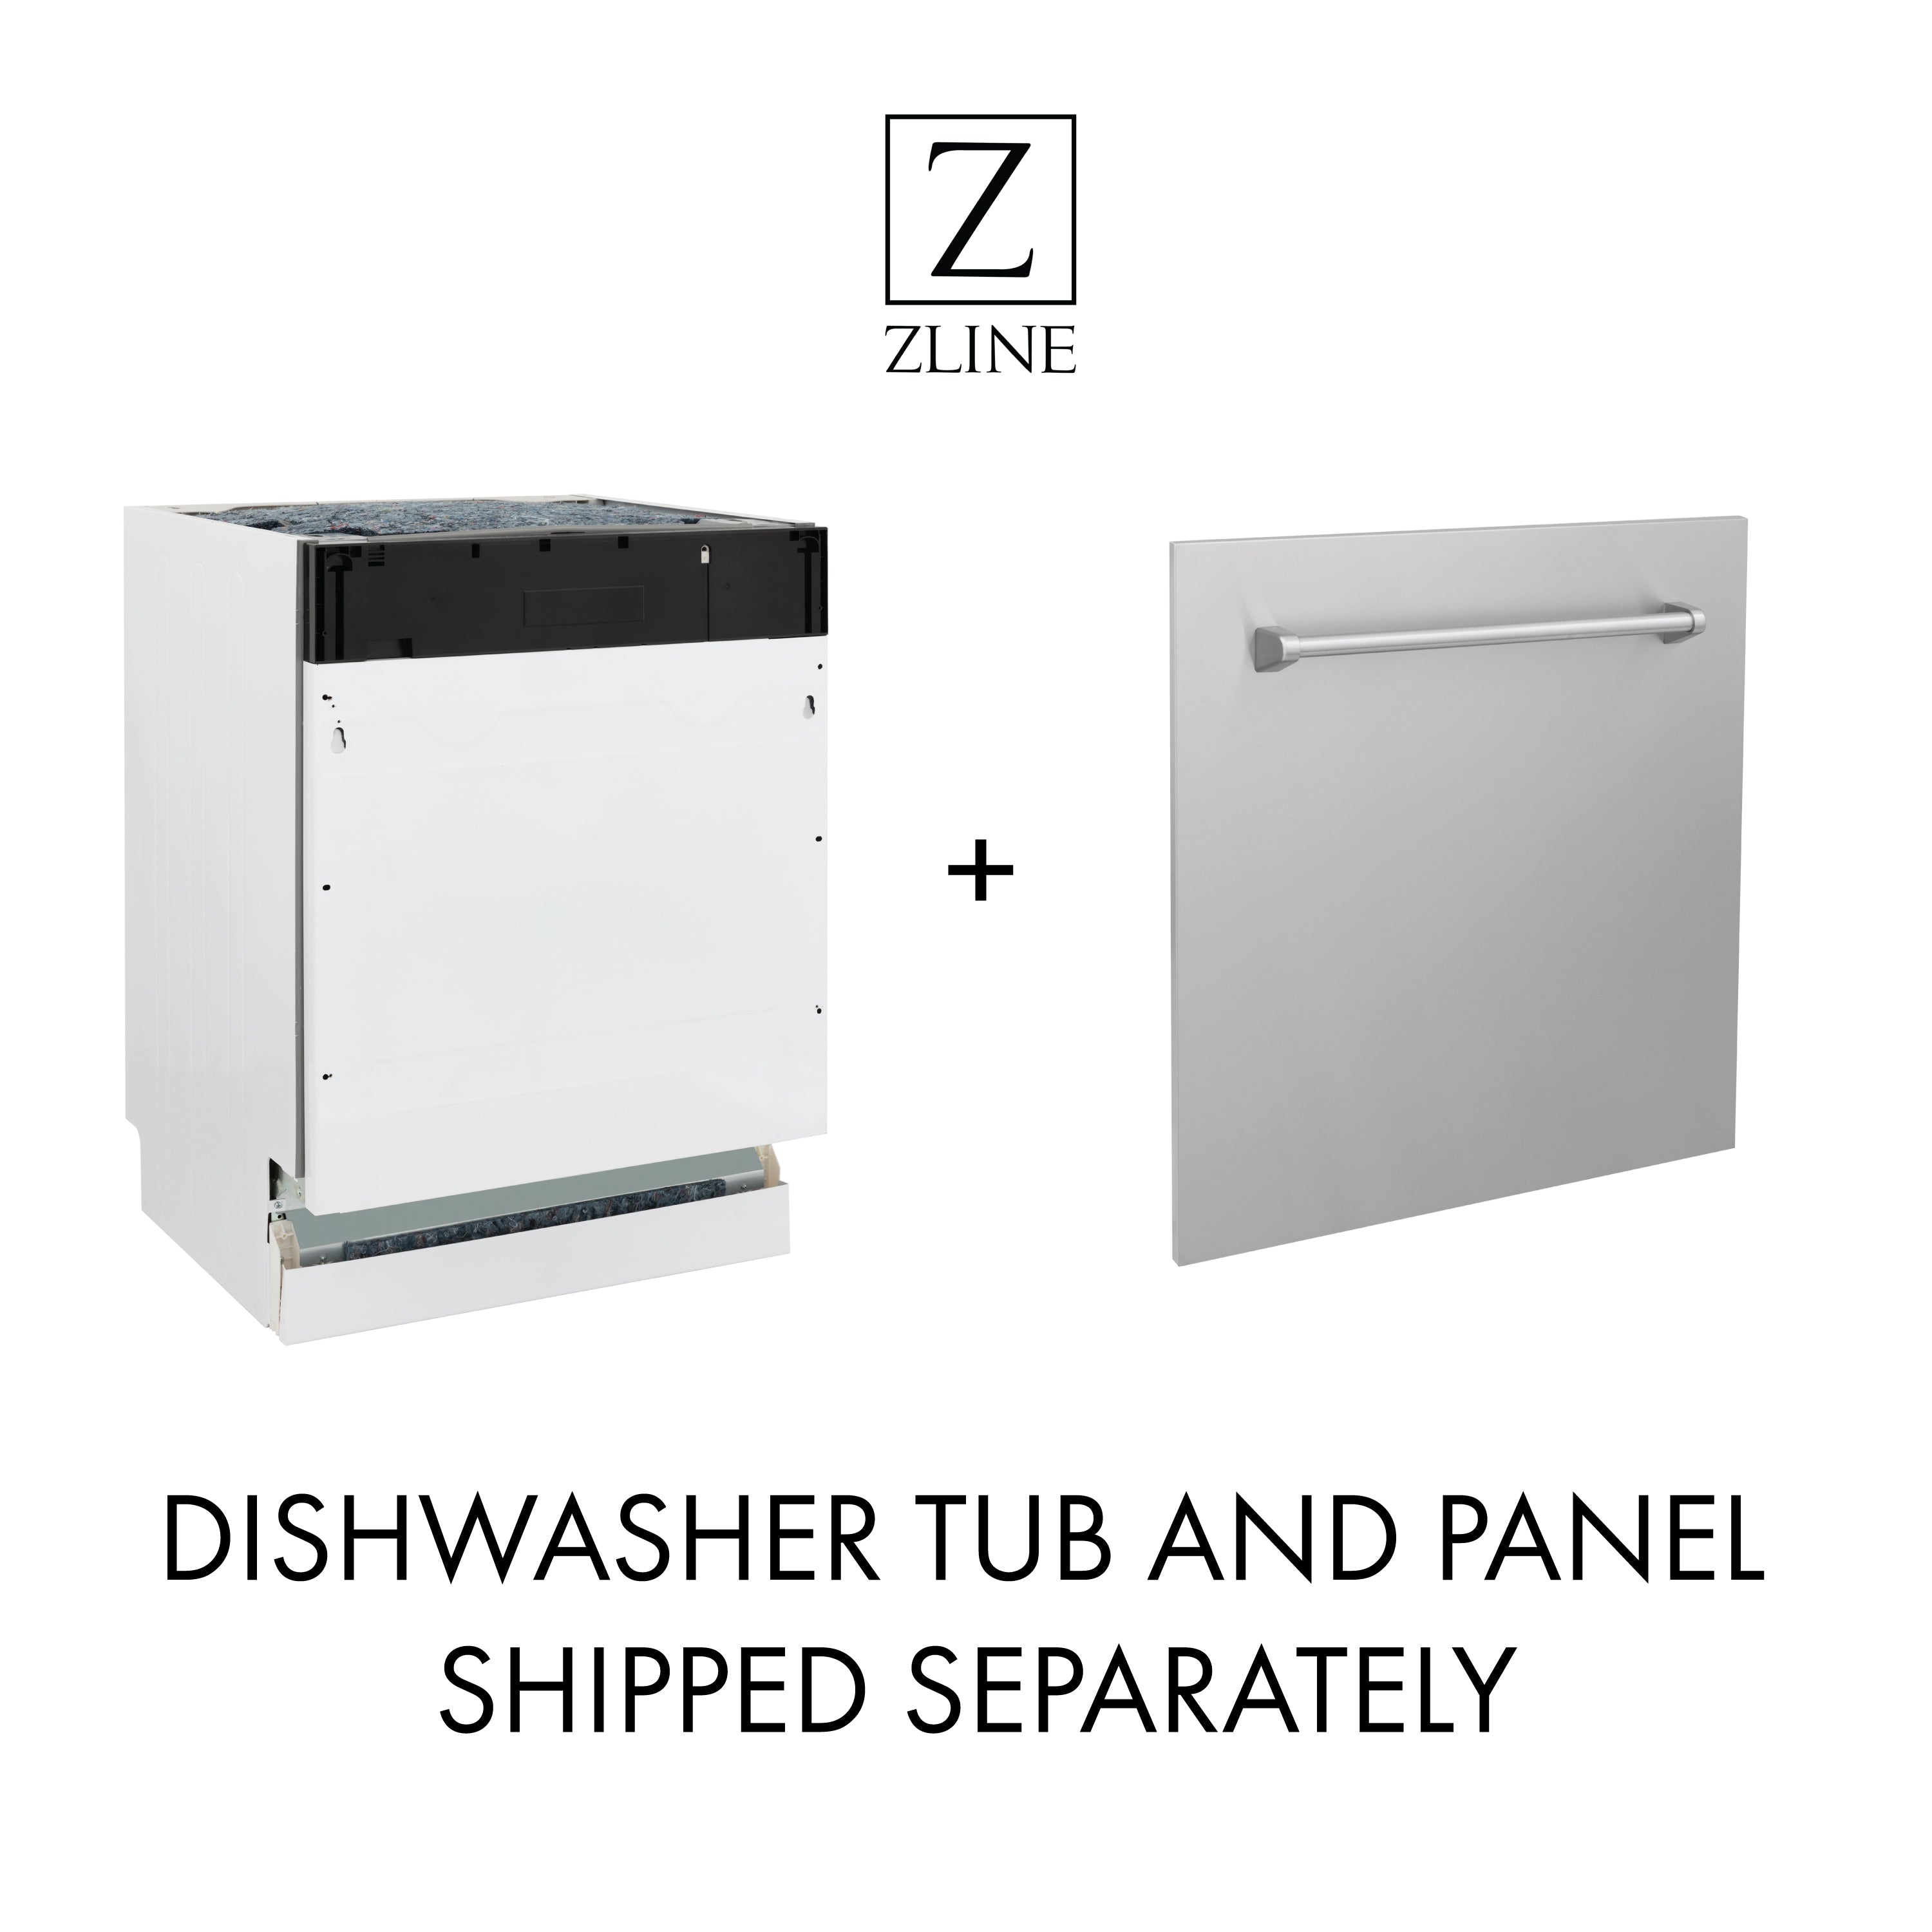 ZLINE Autograph Edition 18 in. Tallac Series 3rd Rack Top Control Built-In Dishwasher in Stainless Steel with Polished Gold Handle, 51dBa (DWVZ-304-18-G)